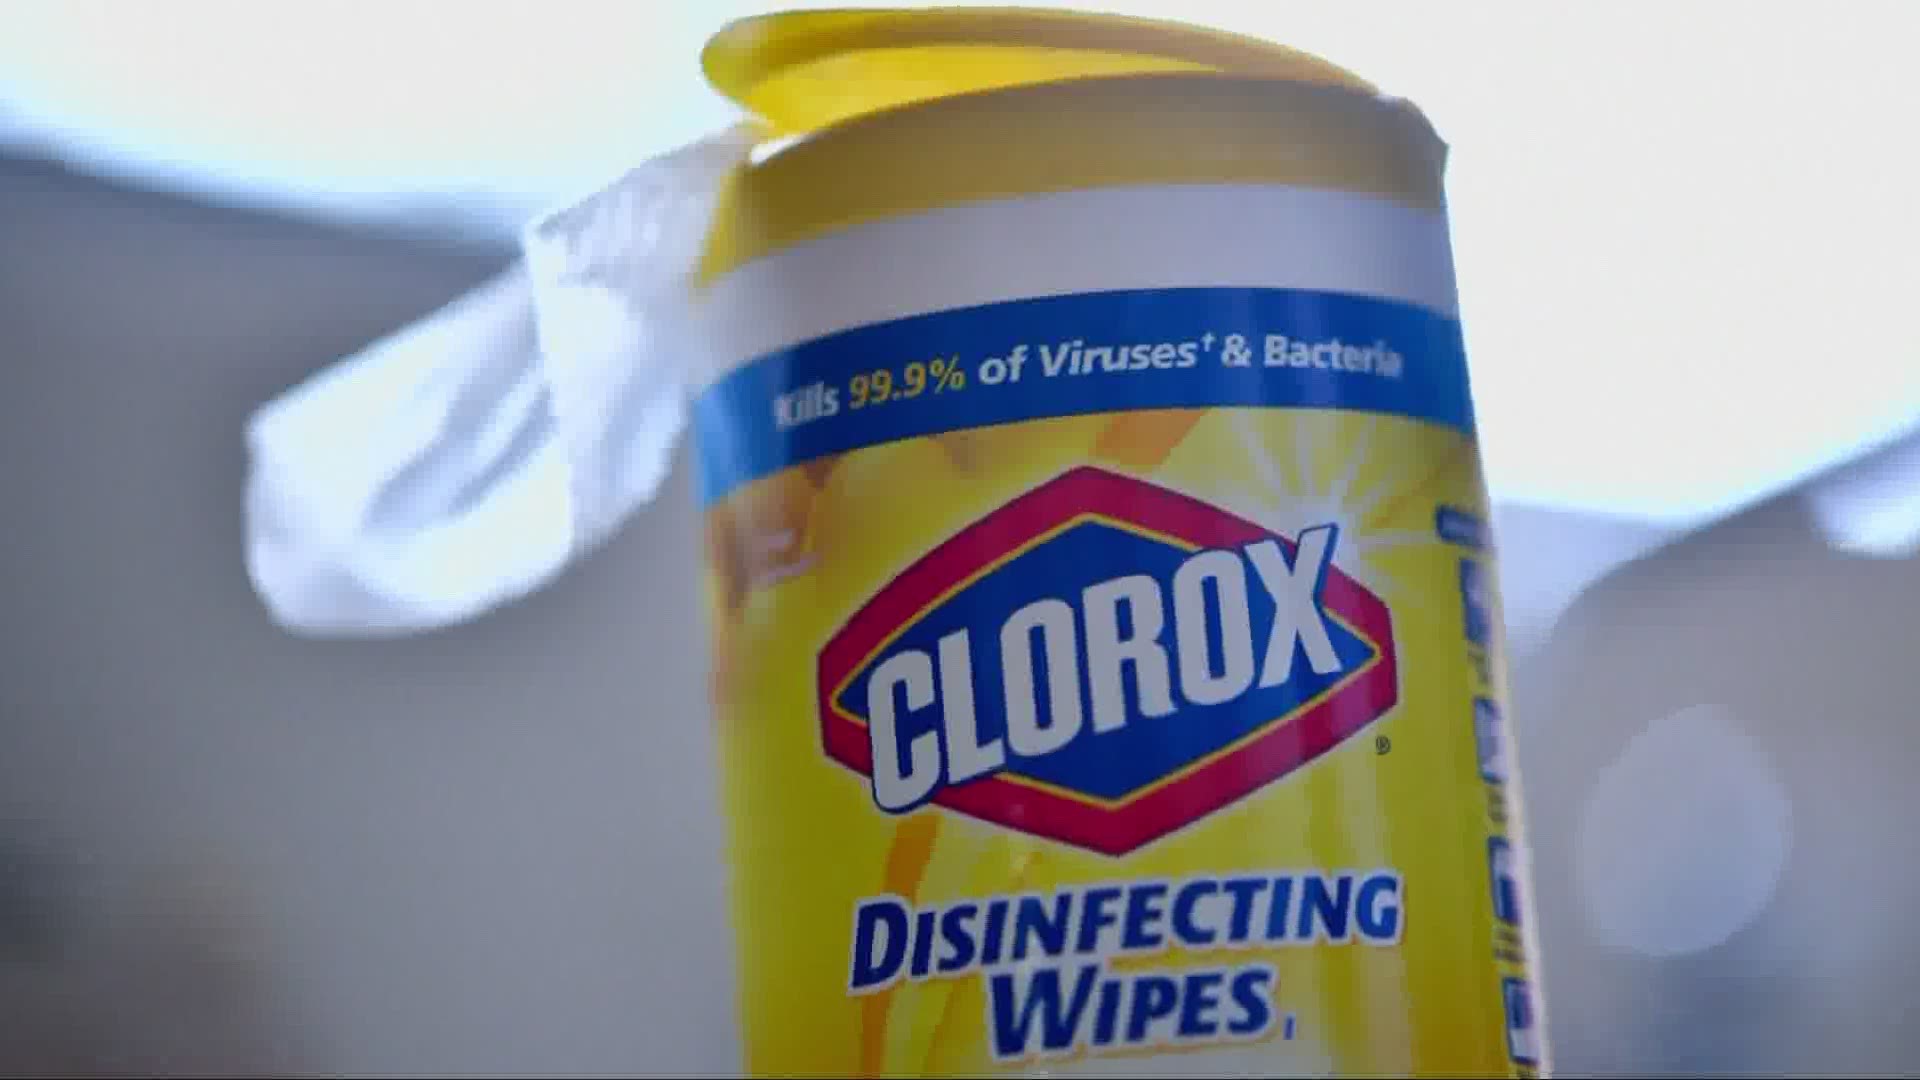 Part of the problem is the lack of one of the key ingredients used to make disinfecting wipes -- polyester spunlace -- which is also used to manufacture PPEs.